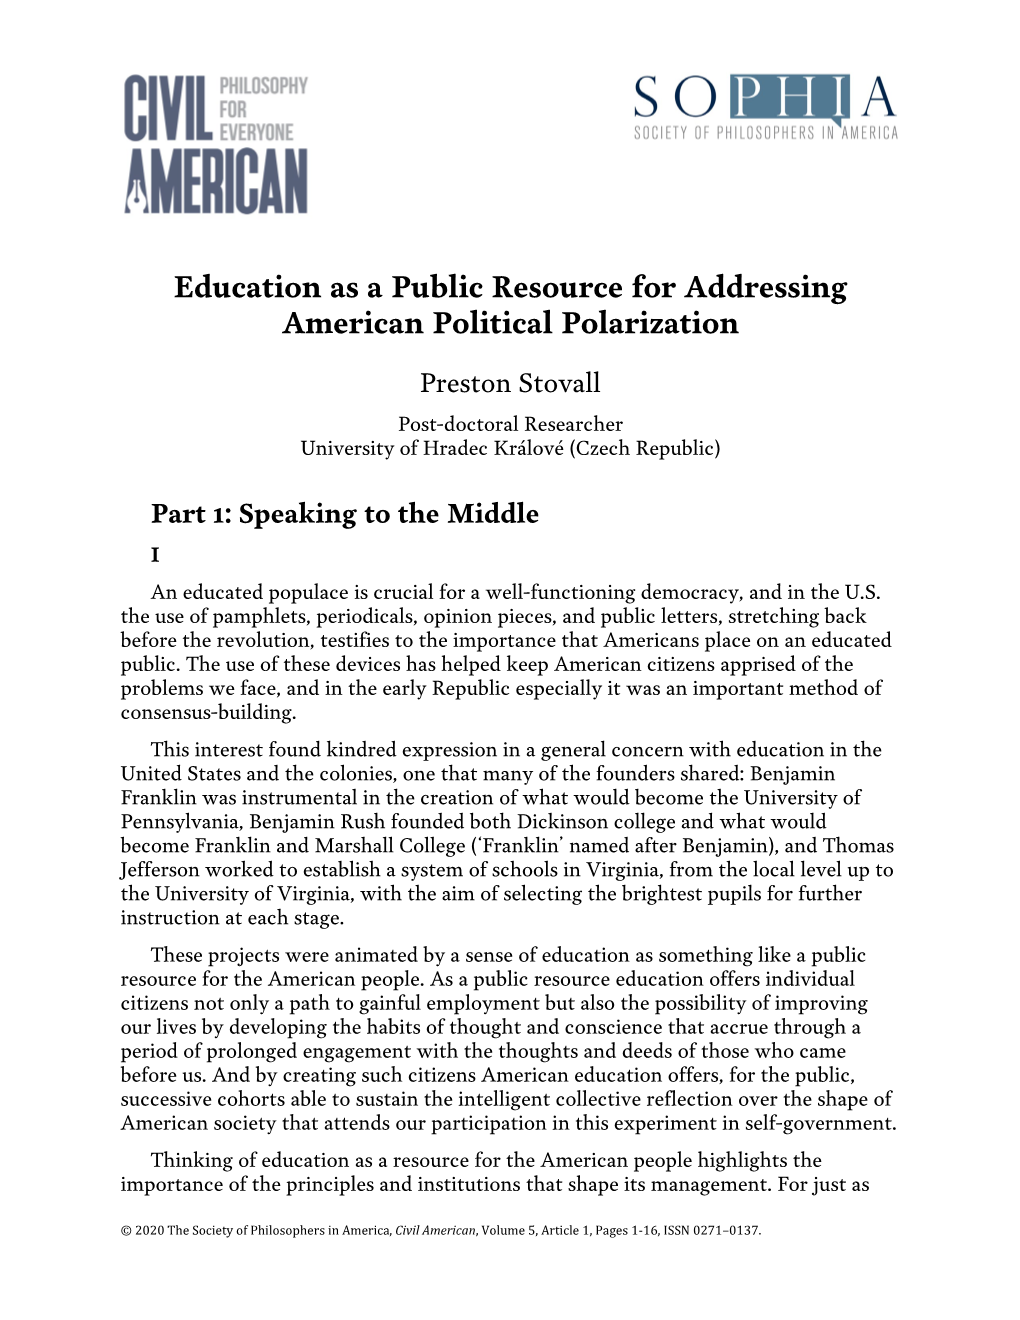 Education As a Public Resource for Addressing American Political Polarization